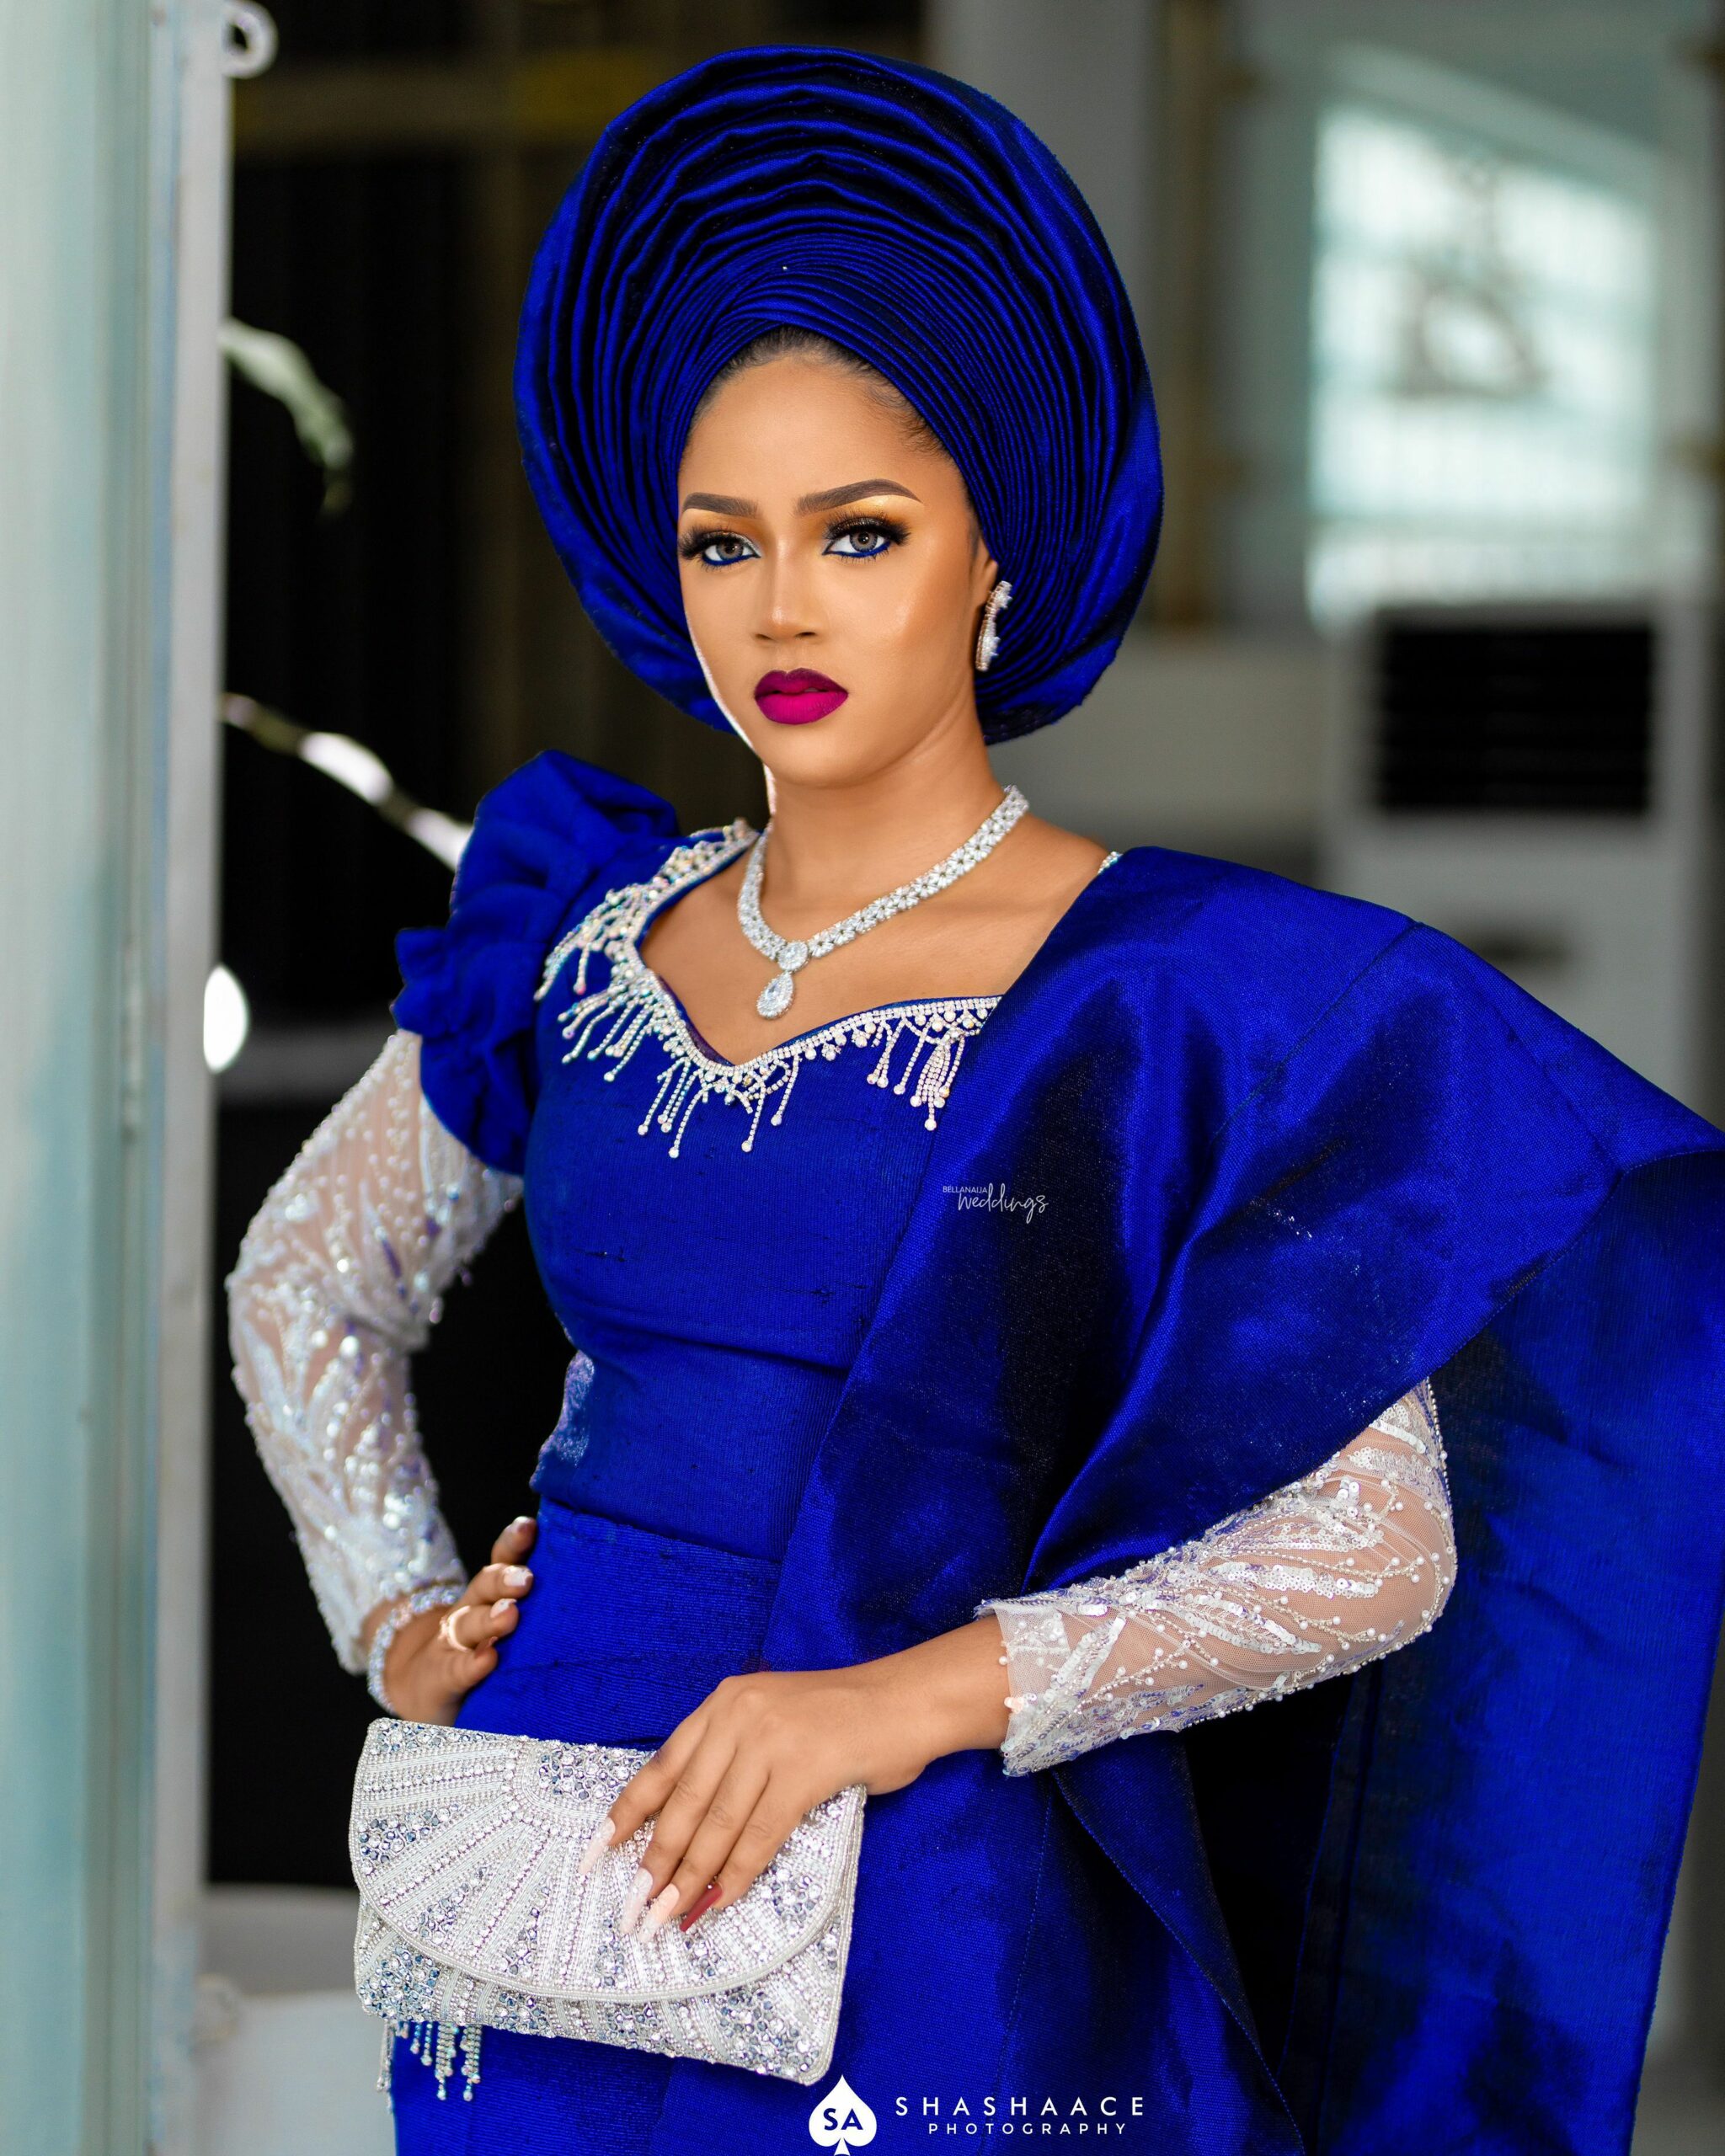 Go Royal & Dazzle On Your Trad With This Beauty Look